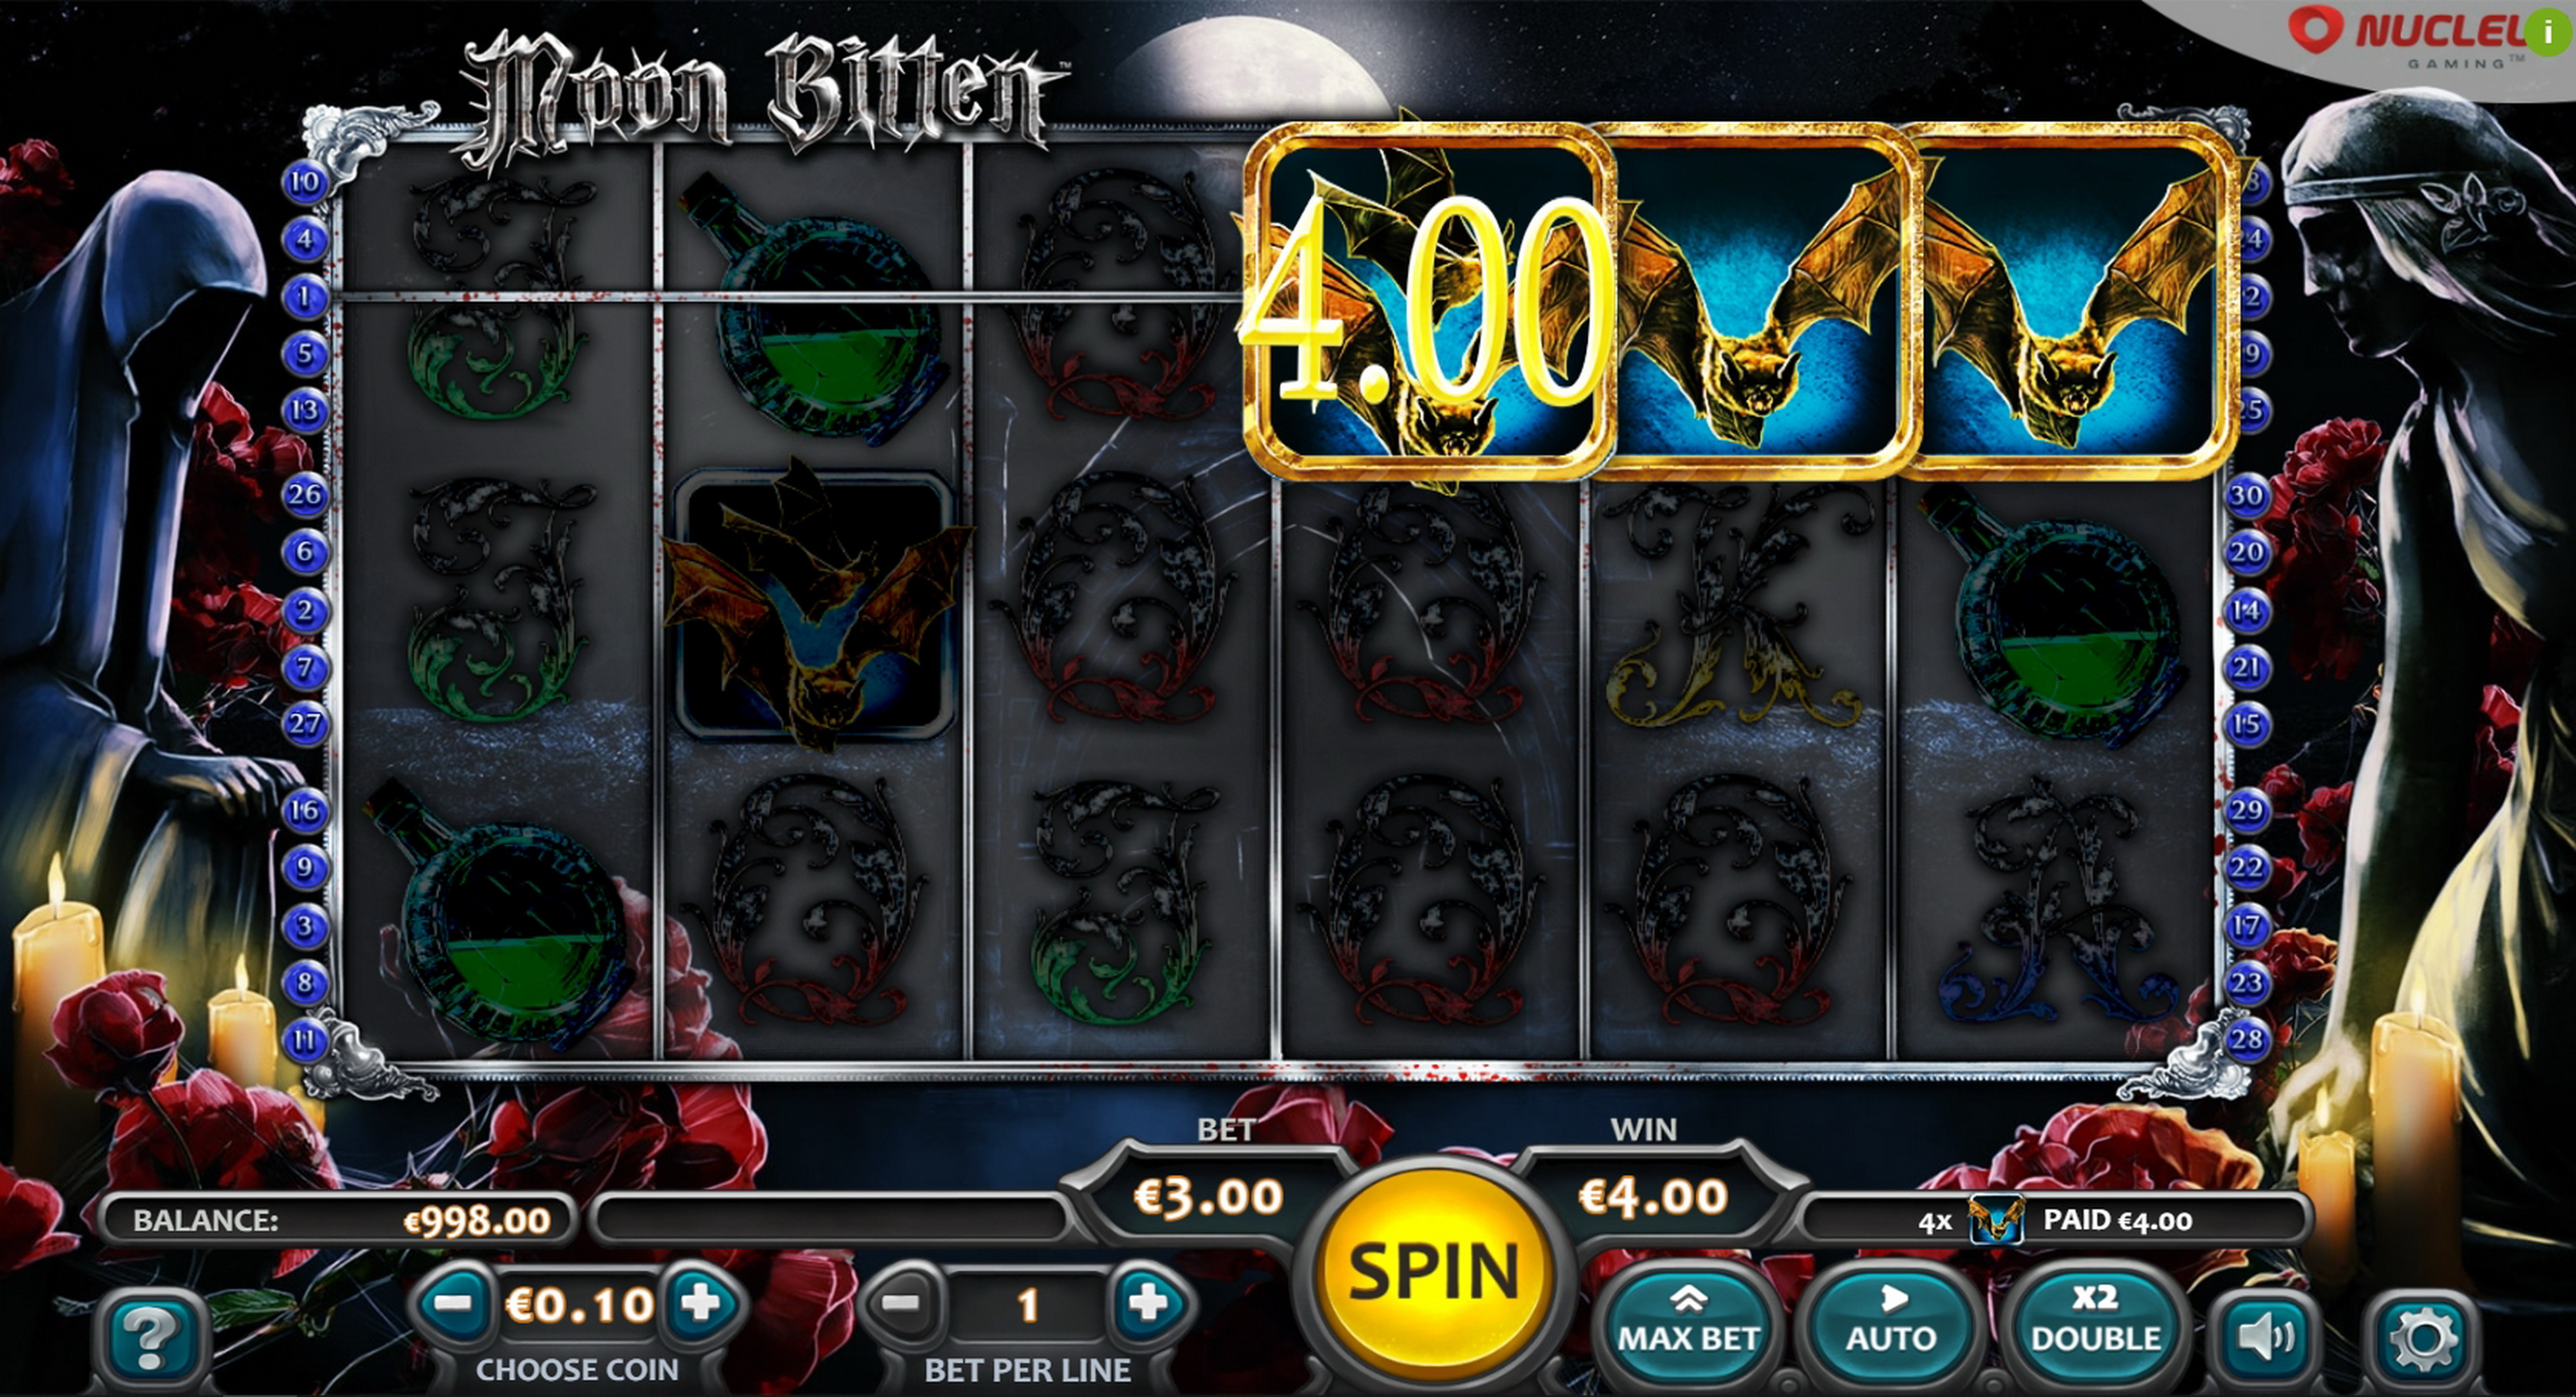 Win Money in Moon Bitten Free Slot Game by Nucleus Gaming